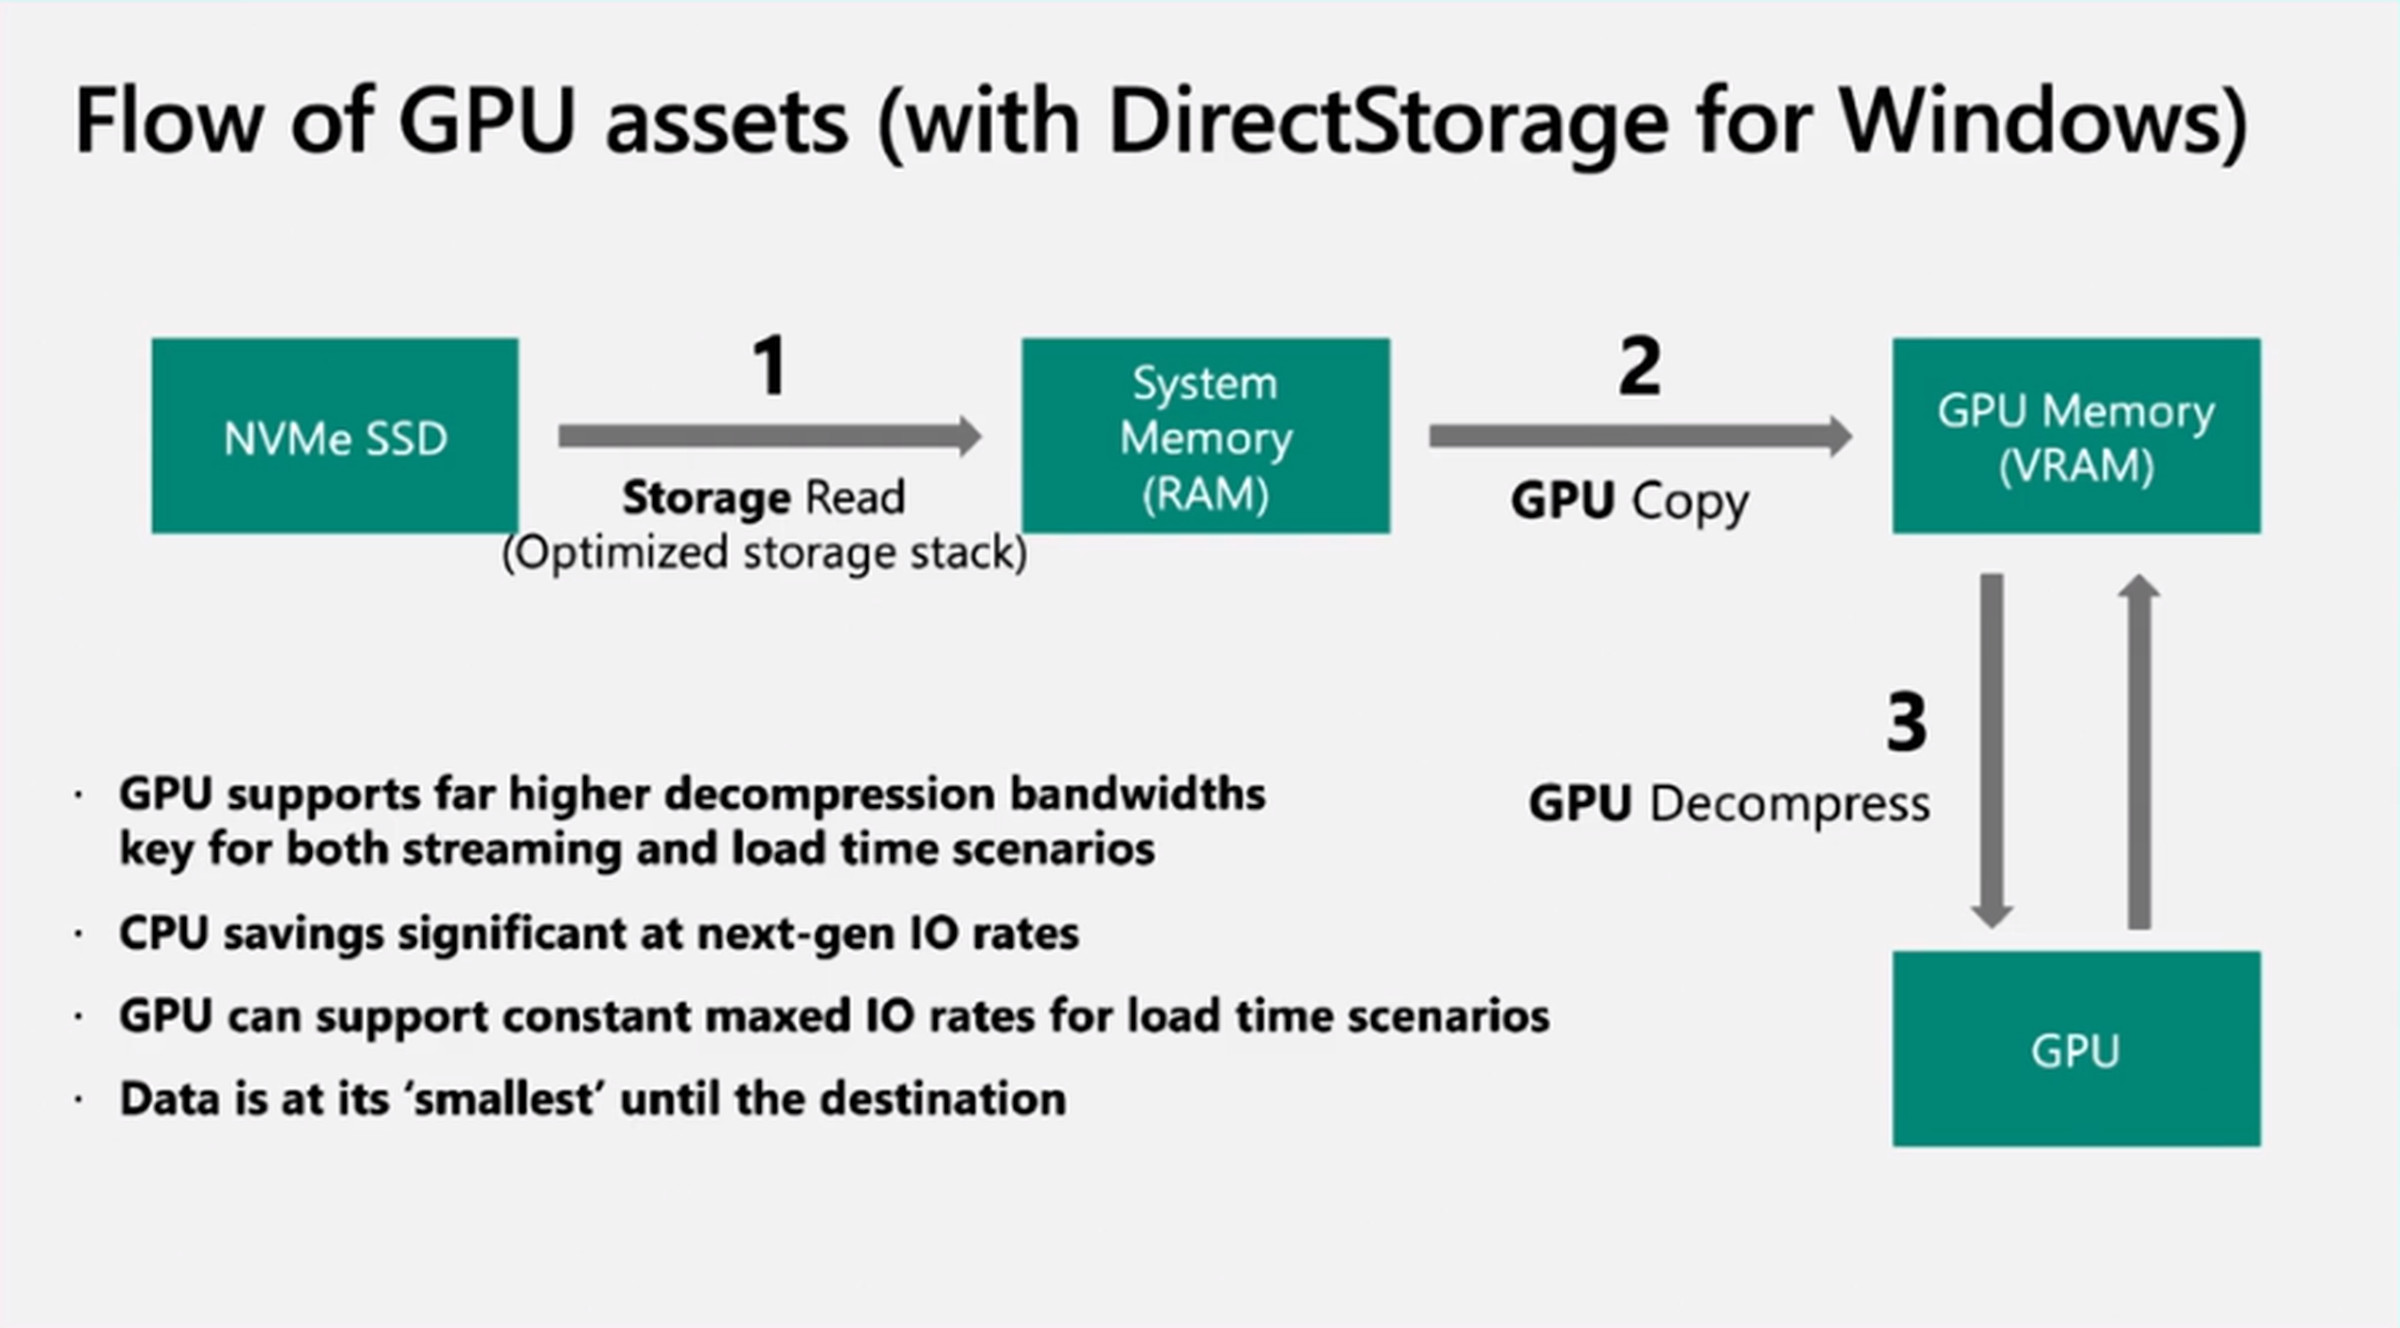 DirectStorage reads from NVMe SSD to RAM, copies to GPU memory, then decompresses on the GPU.